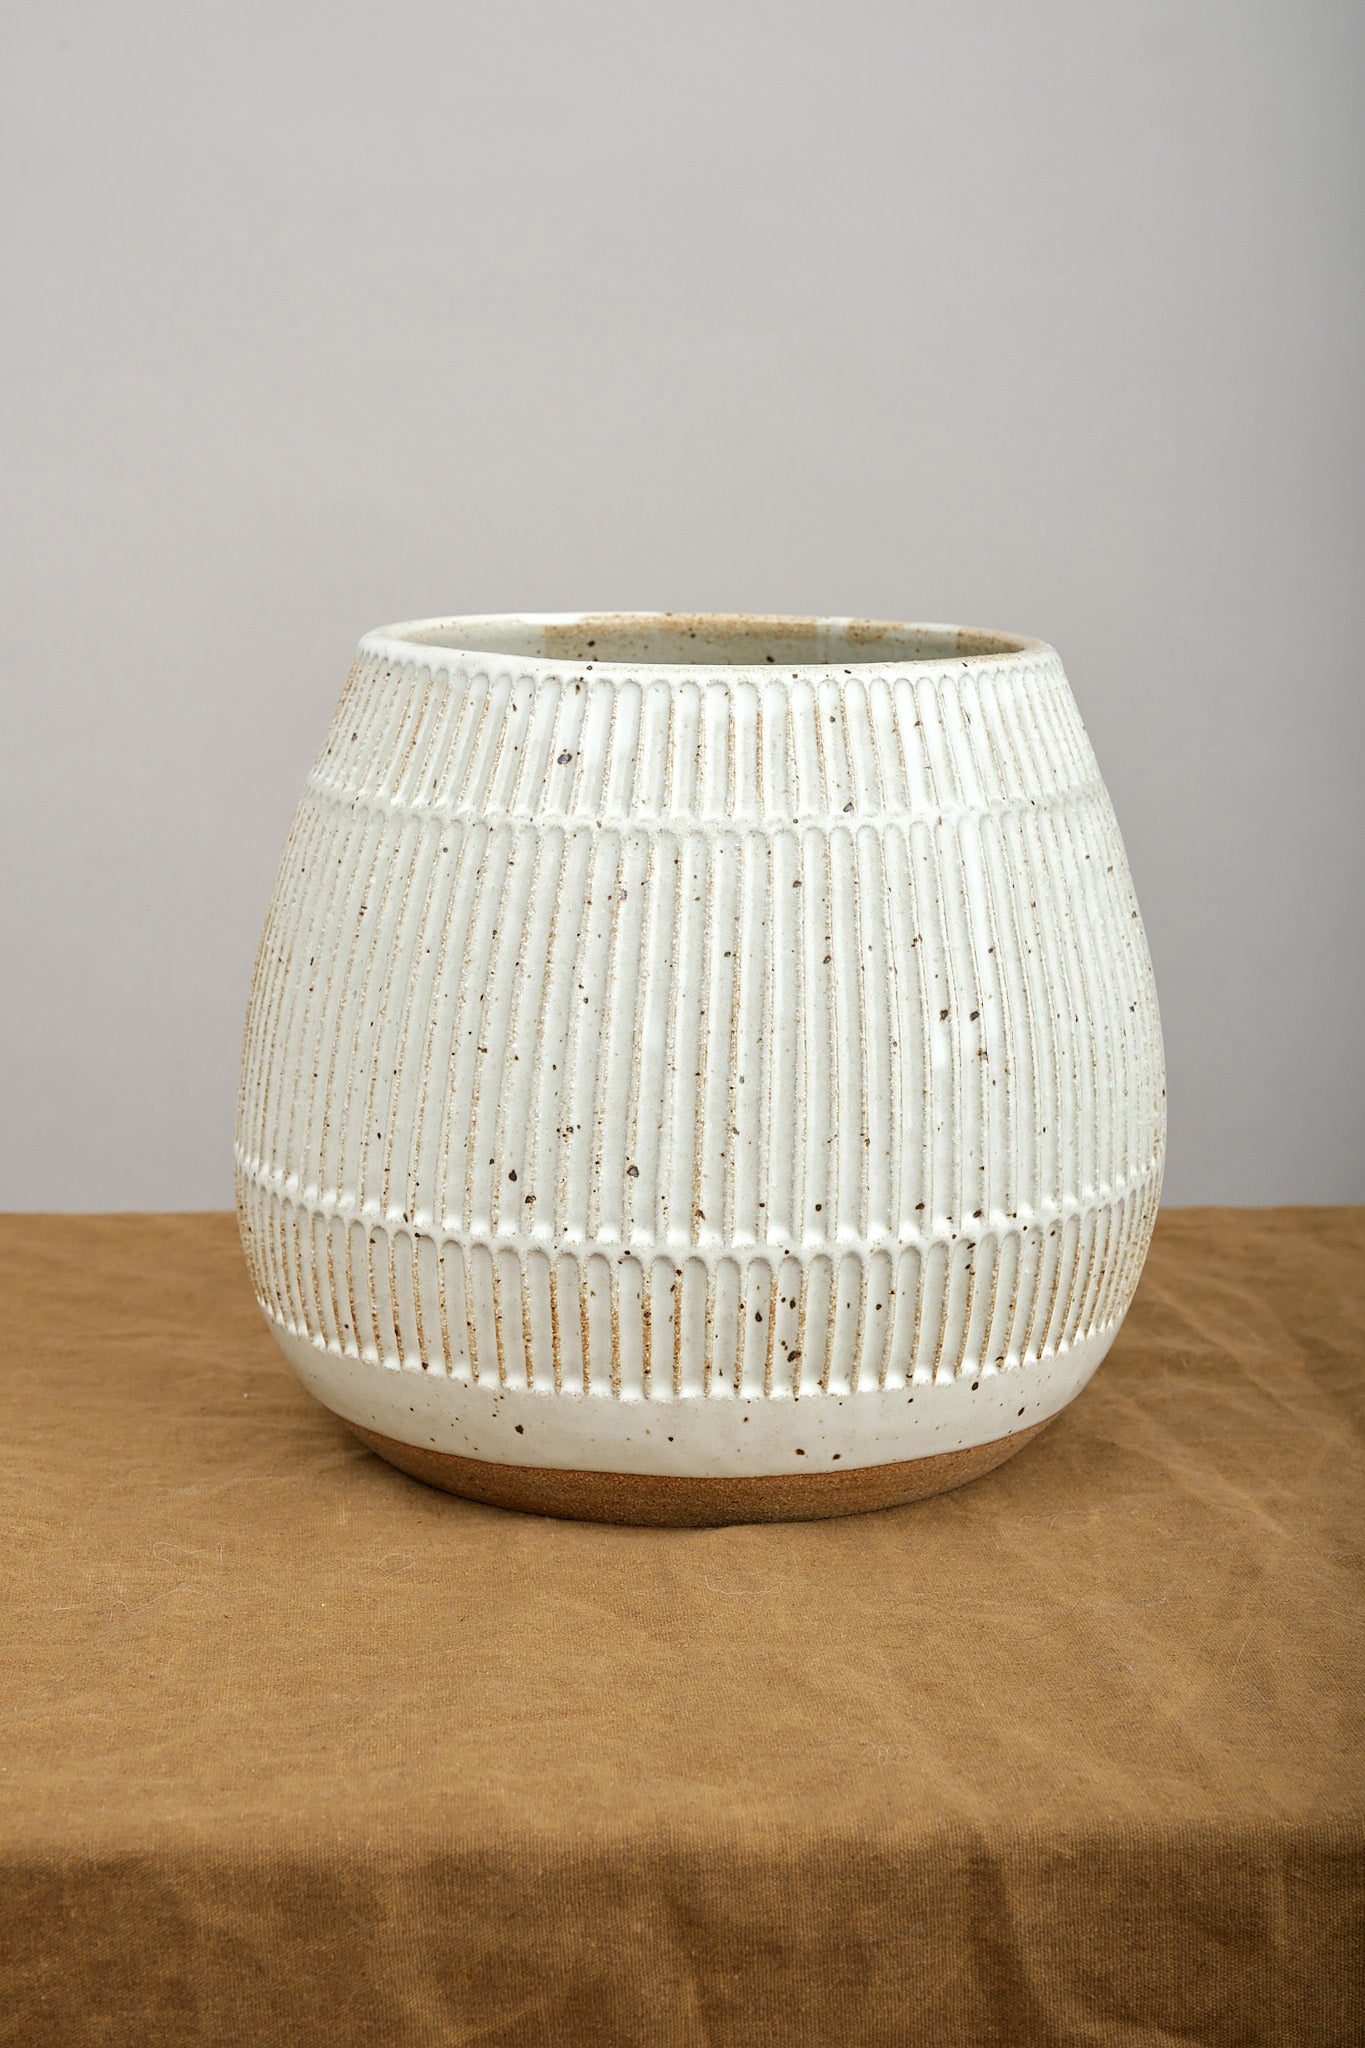 Mt. Washington Pottery Large Three Row Planter in speckled white